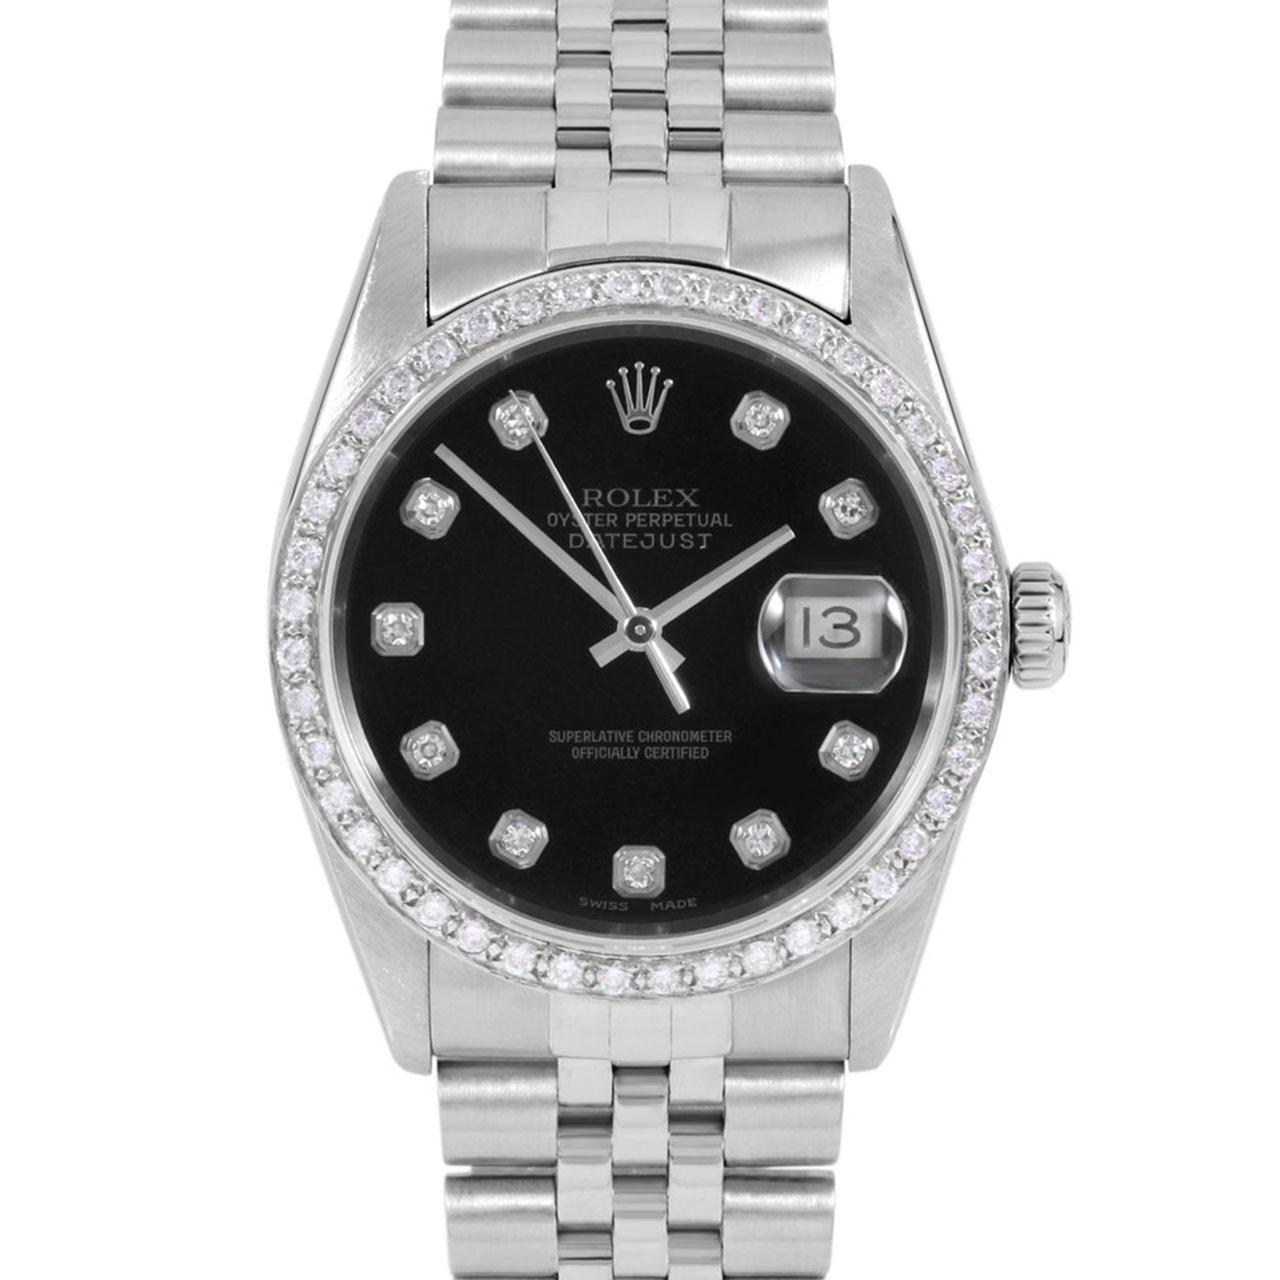 Swiss Wrist - SKU 16014-BLK-DIA-AM-BDS-JBL

Brand : Rolex
Model : Datejust Ref# 16014 - Plastic Quickset Model 
Gender : Mens
Metals :  Stainless Steel
Case Size : 36 mm
Dial : Custom Black Diamond Dial (This dial is not original Rolex And has been